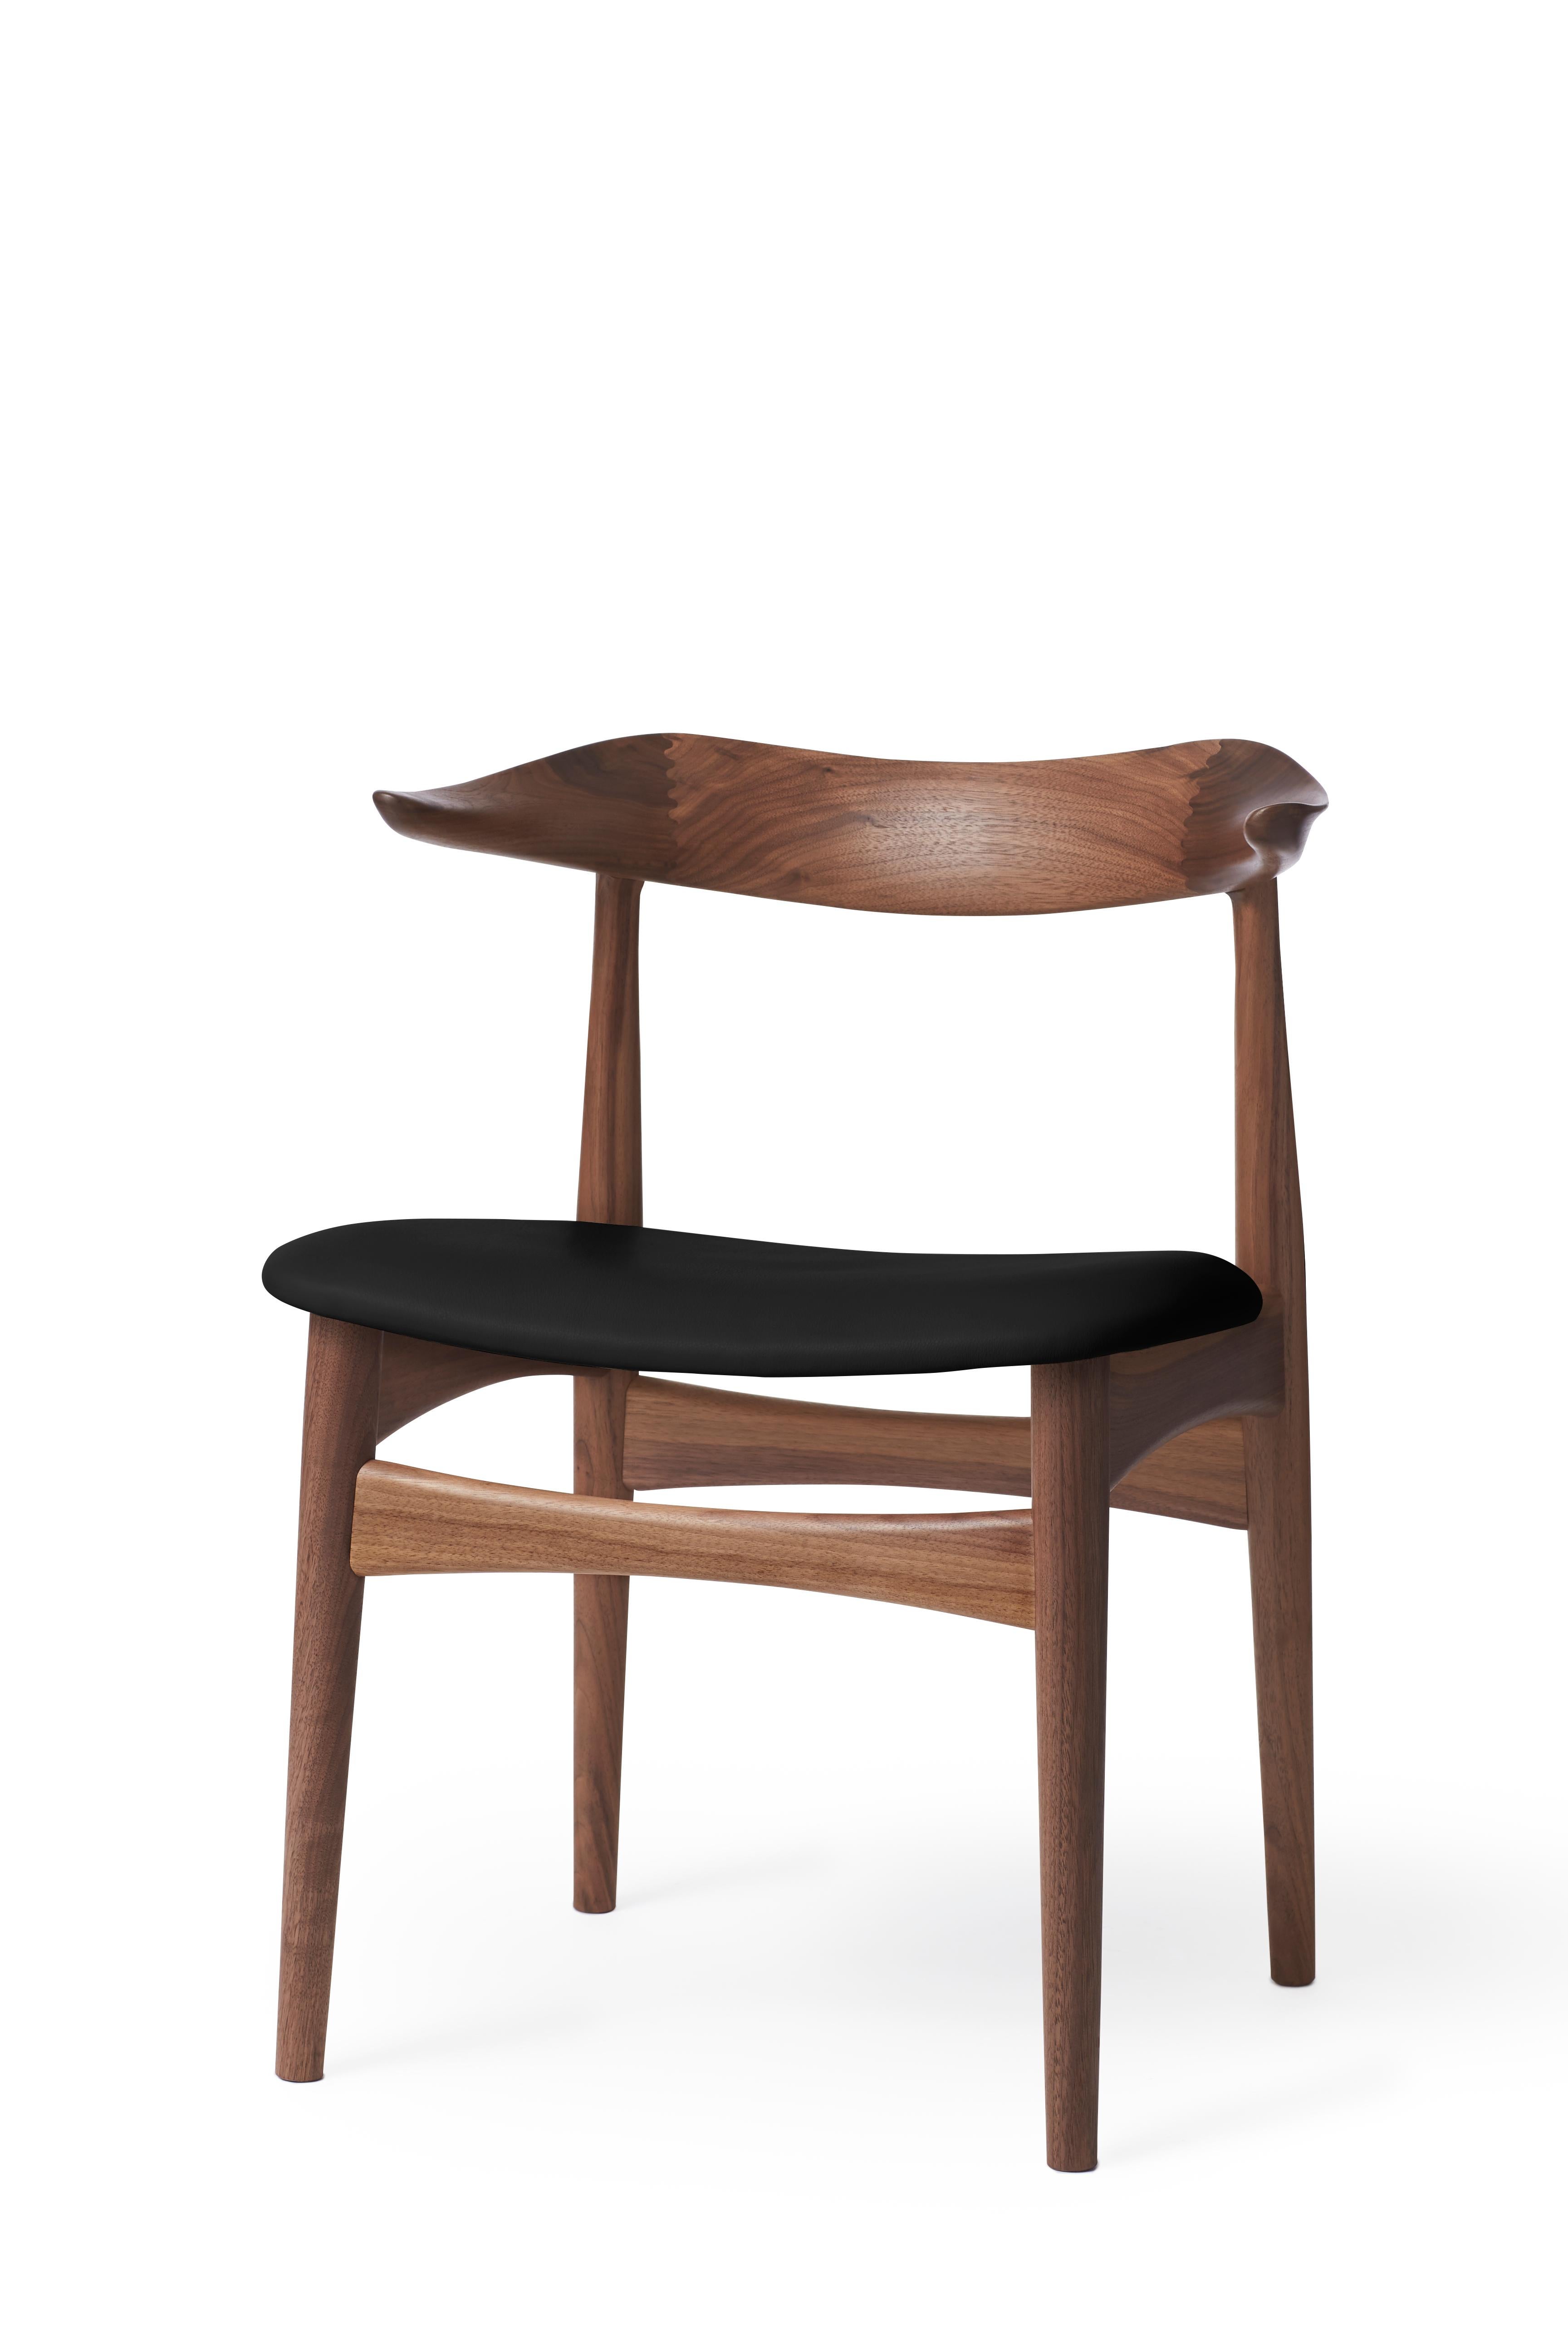 For Sale: Black (Prescott 207) Cow Horn Walnut Chair, by Knud Færch from Warm Nordic 2